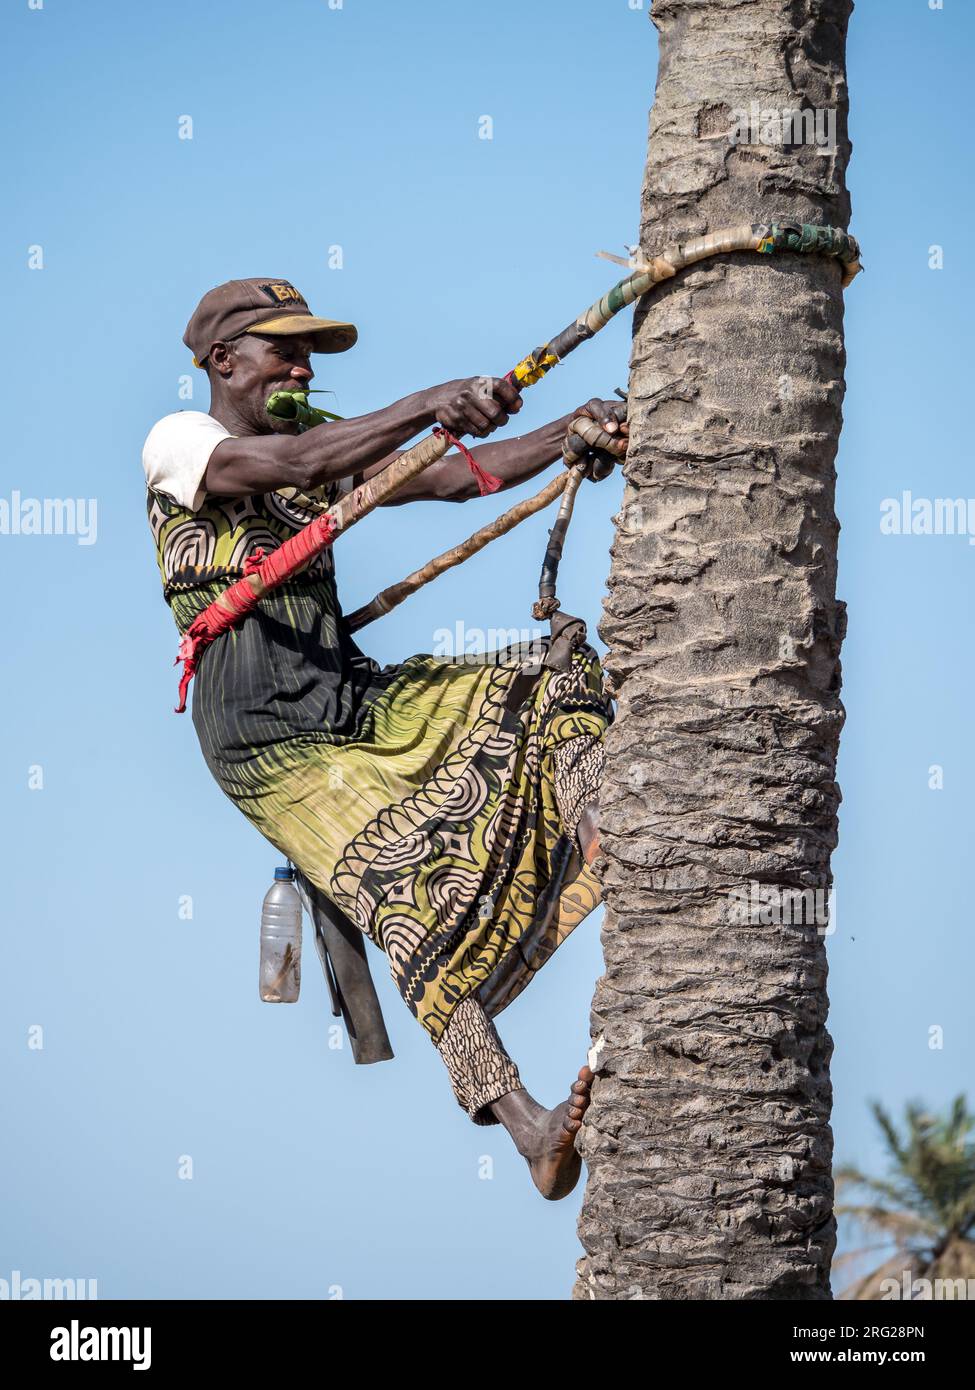 Typical landscape in the Gambia. Man climbing a coconut tree. Stock Photo